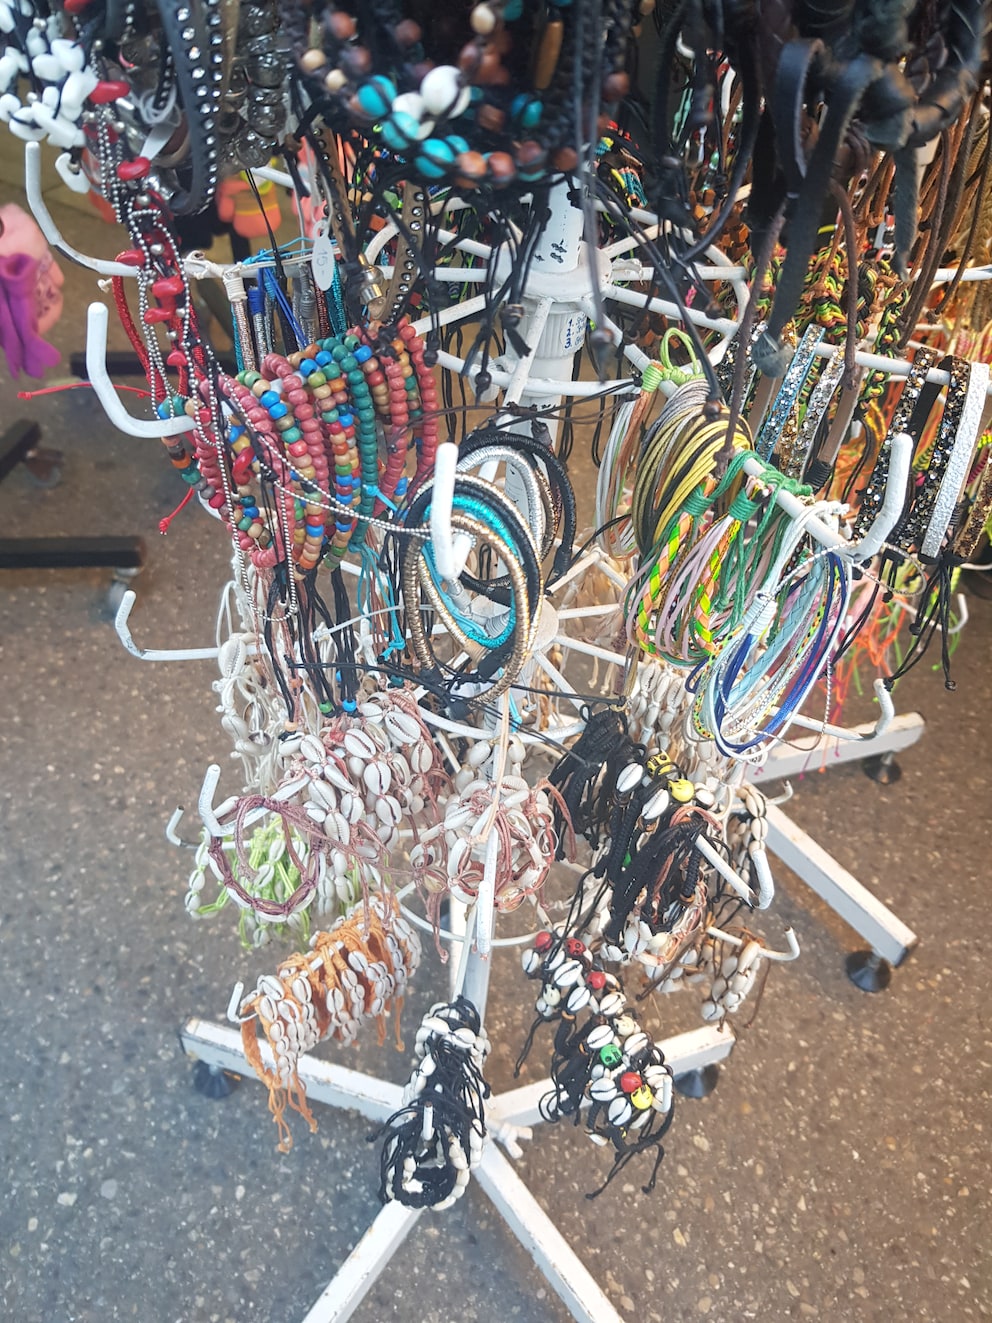 These are the kind of jewellery stands you get on holiday. The difference being that jewellery there is a fraction of the price.